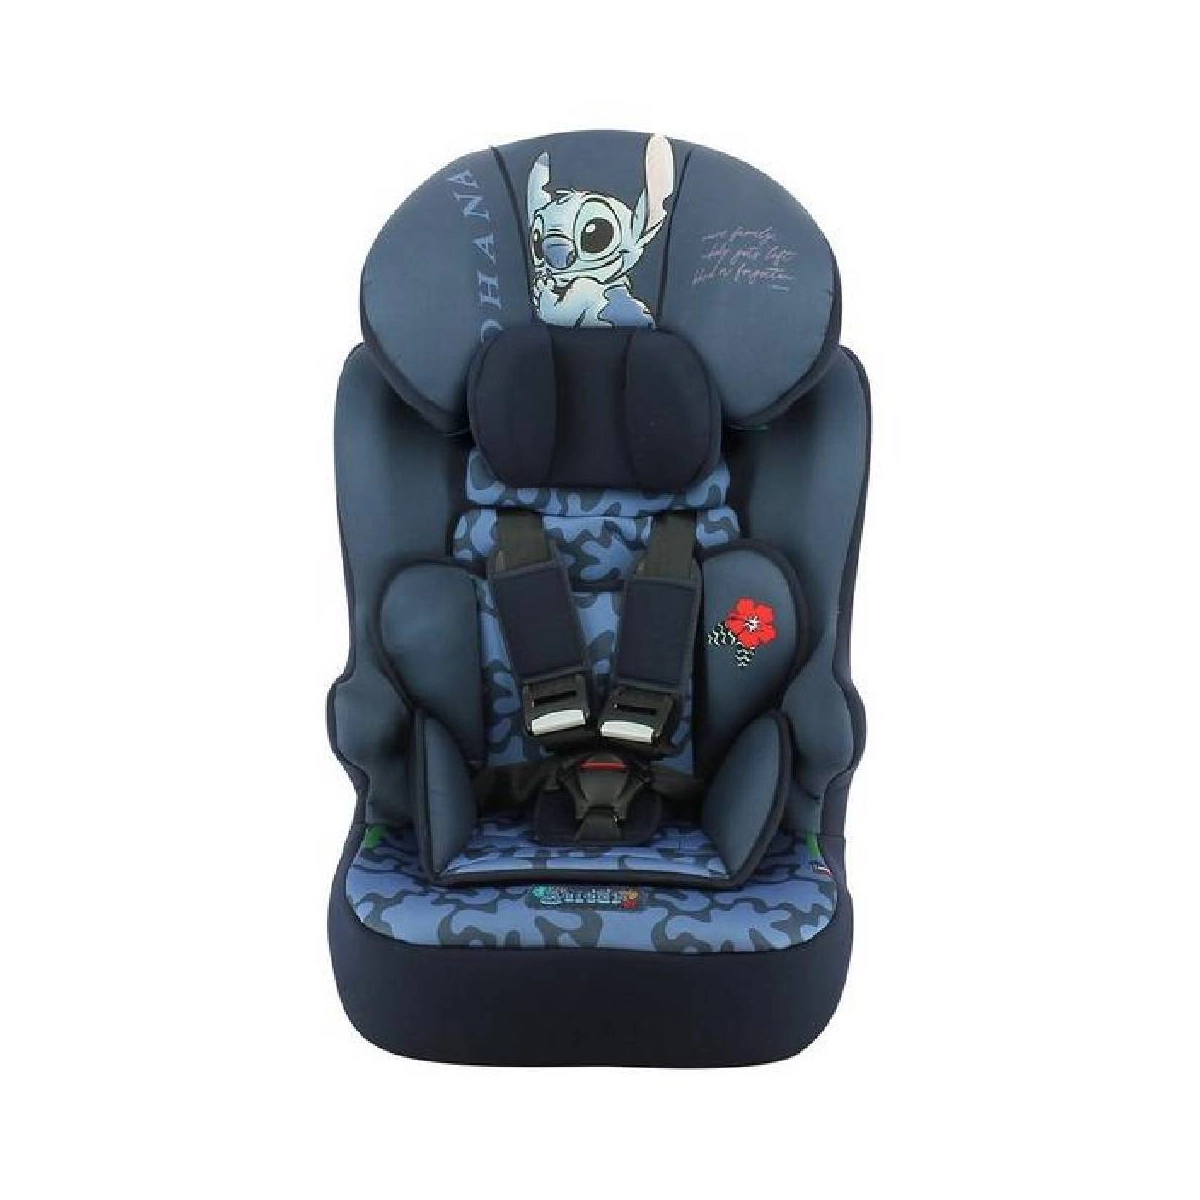 Nania Race I Disney Belt Fitted High Back Booster Group 1/2/3 Car Seat